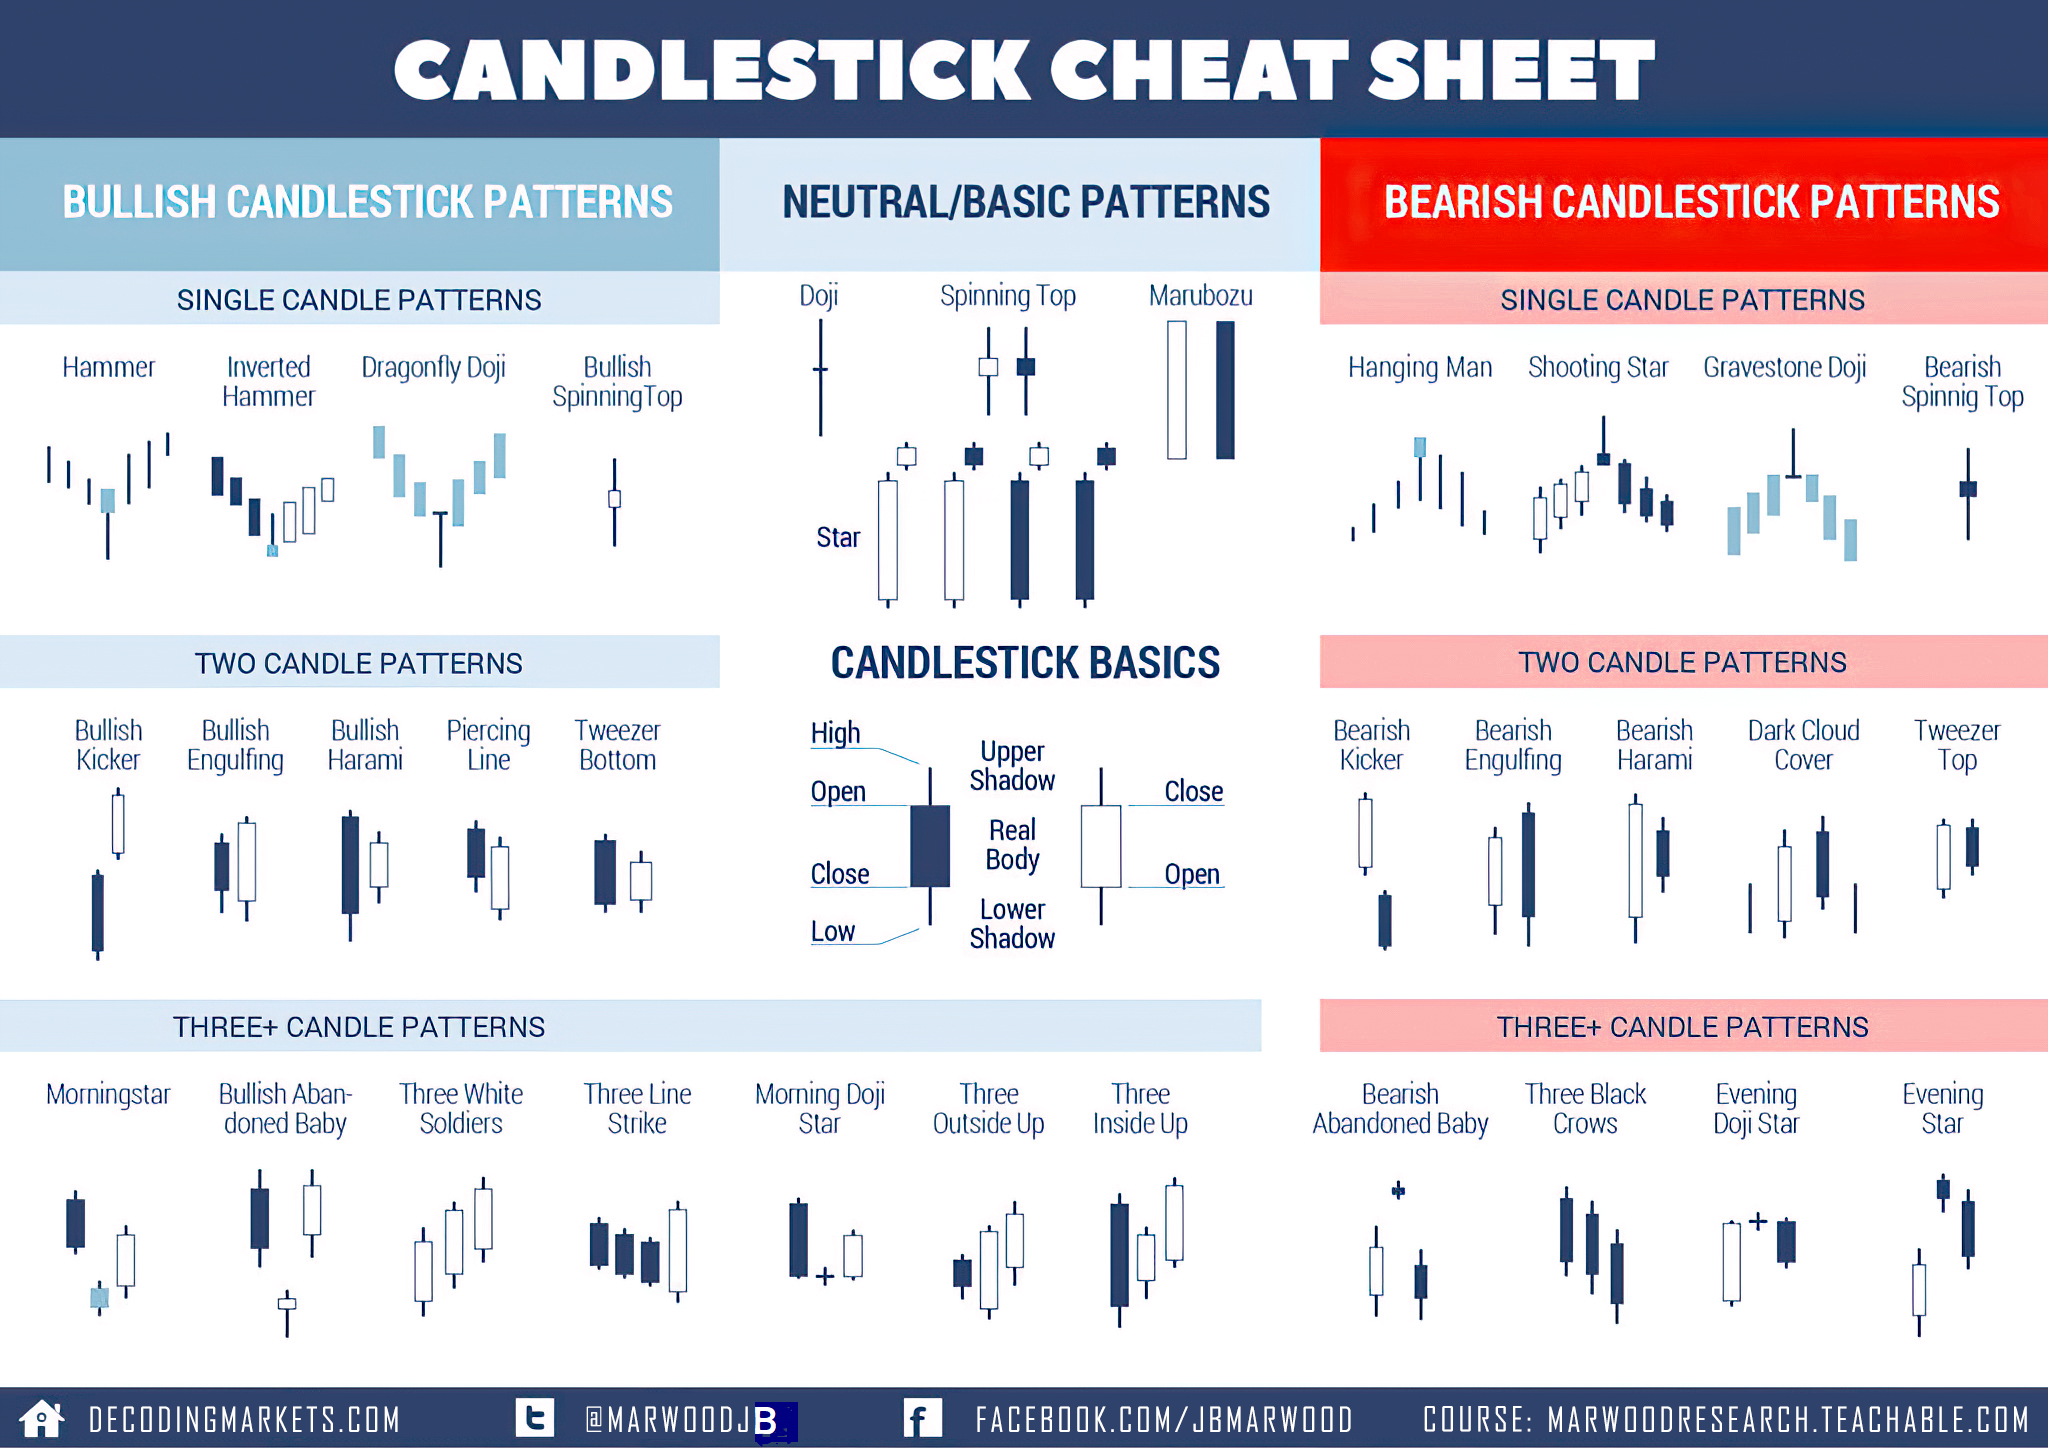 What are basic candlestick patterns? 